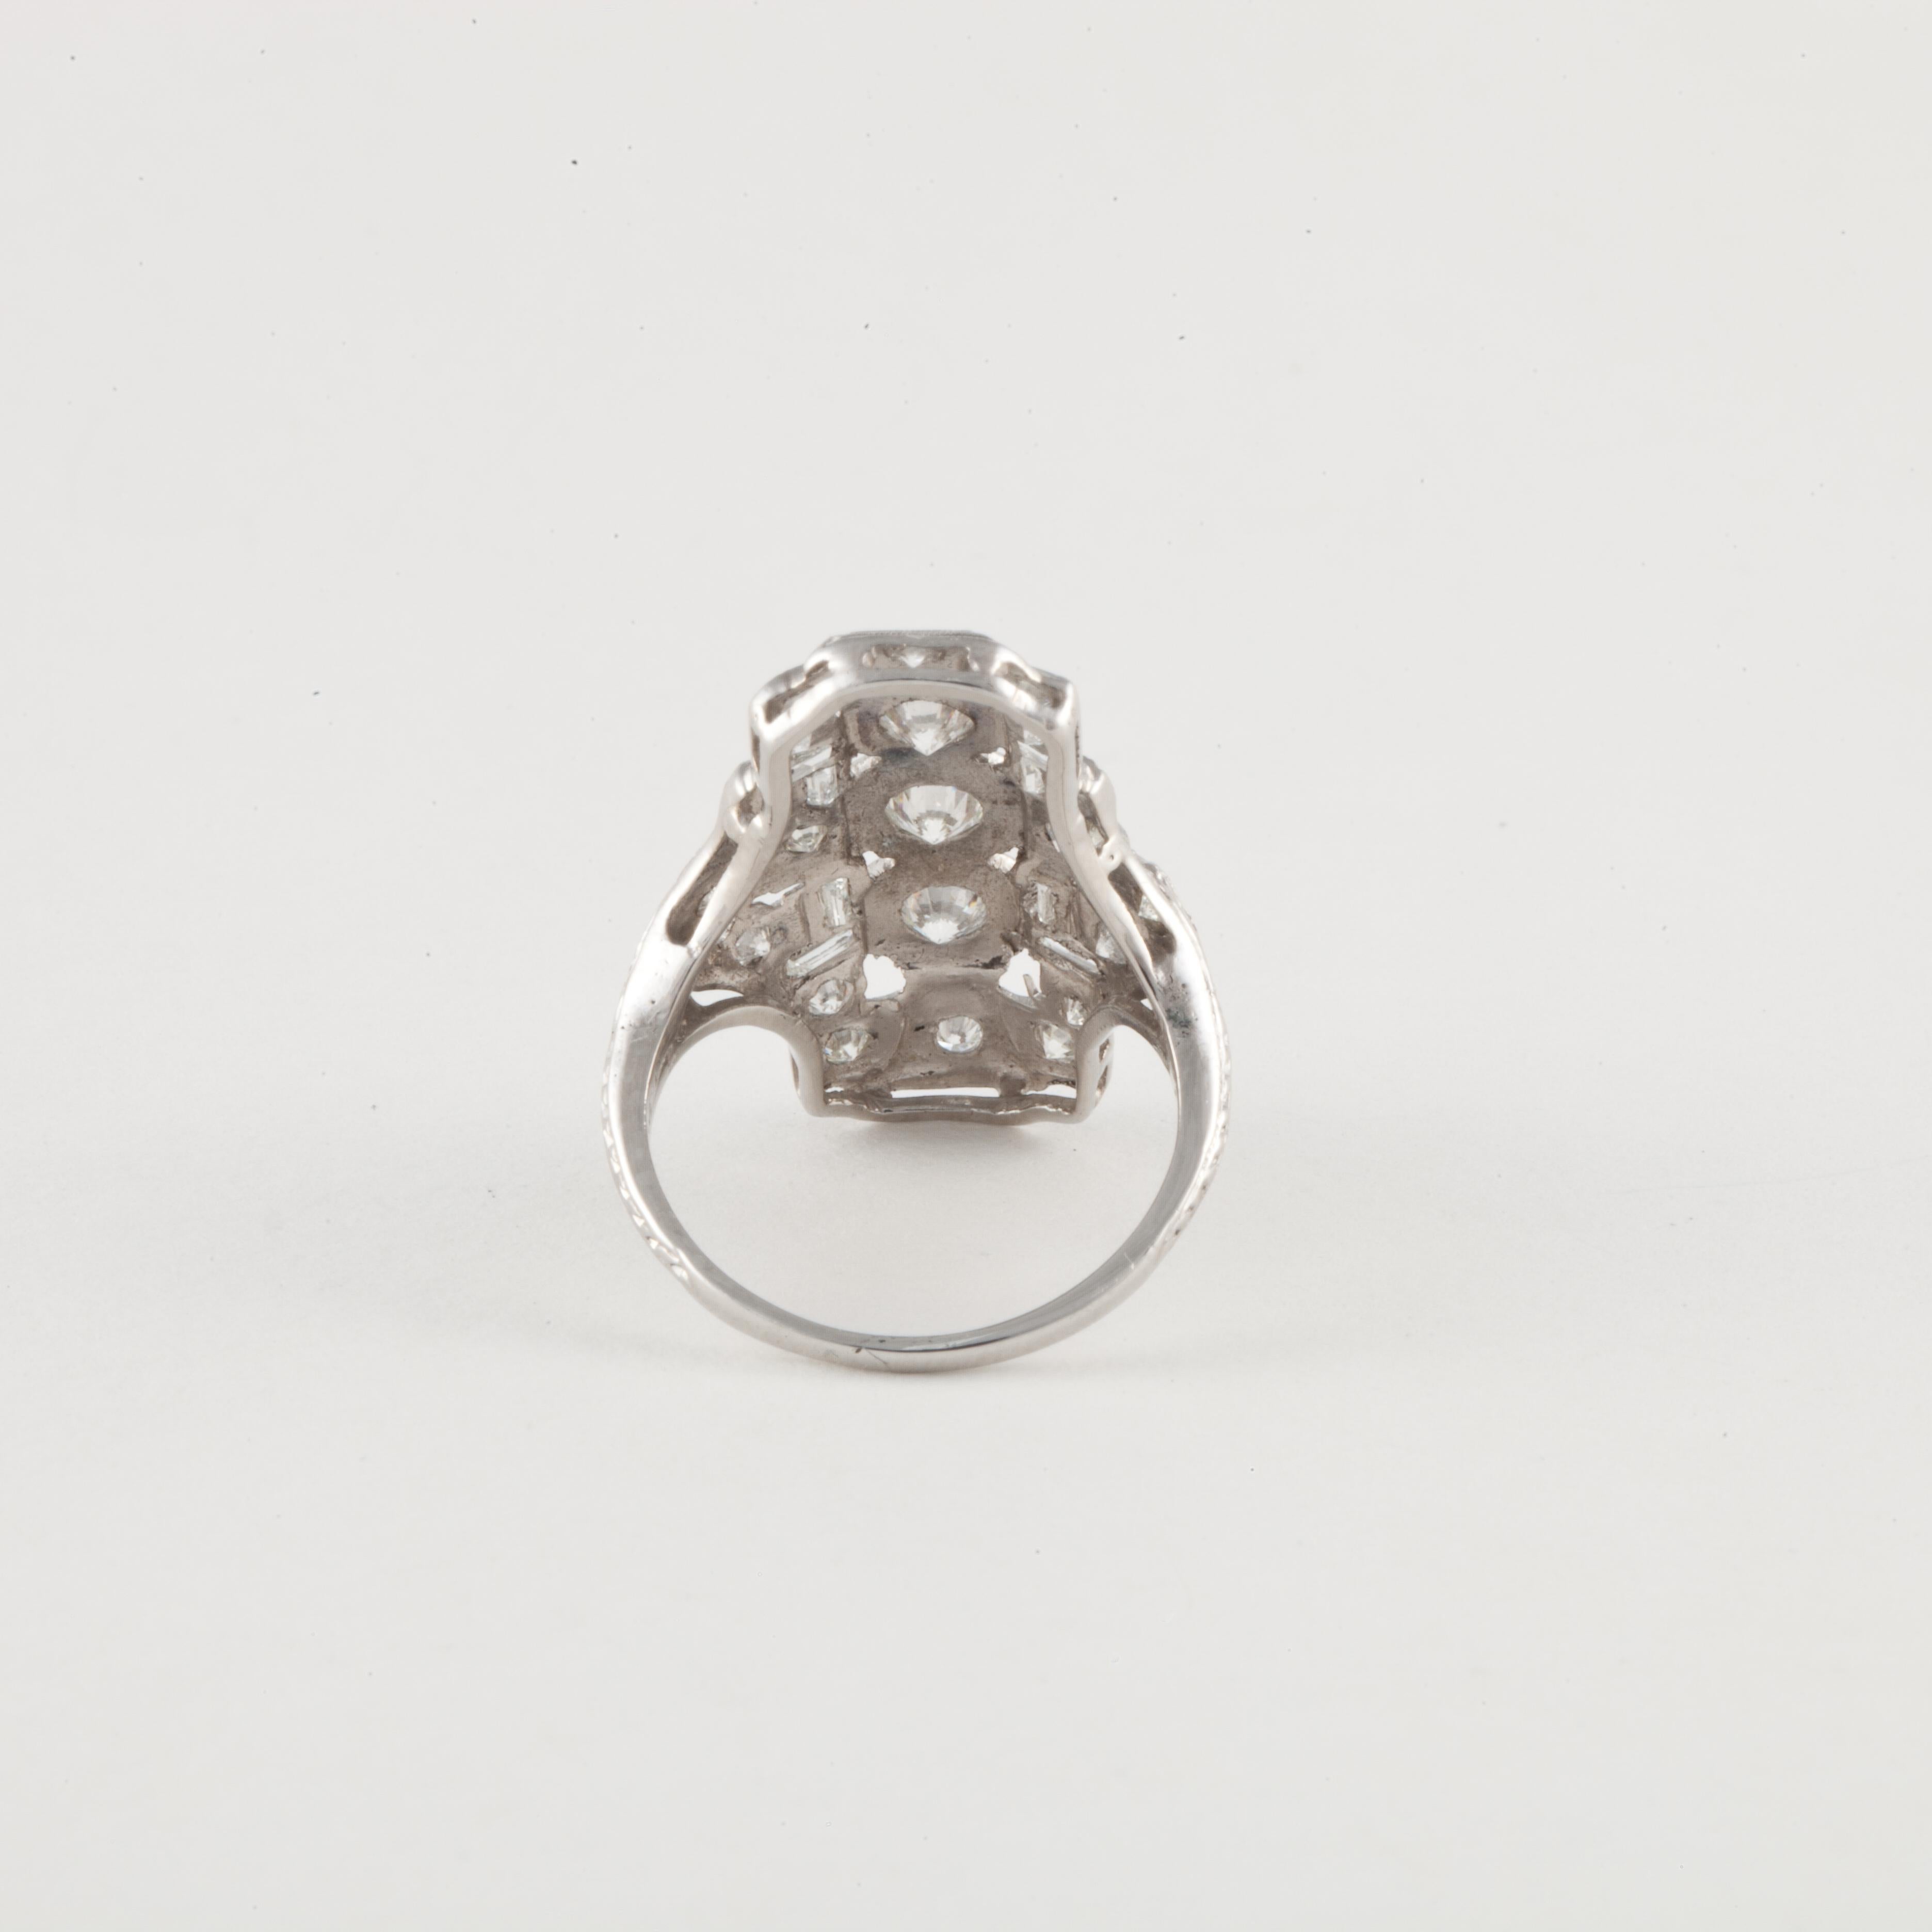 Round Cut Art Deco Platinum Diamond Navette Ring with Engraving and Filigree